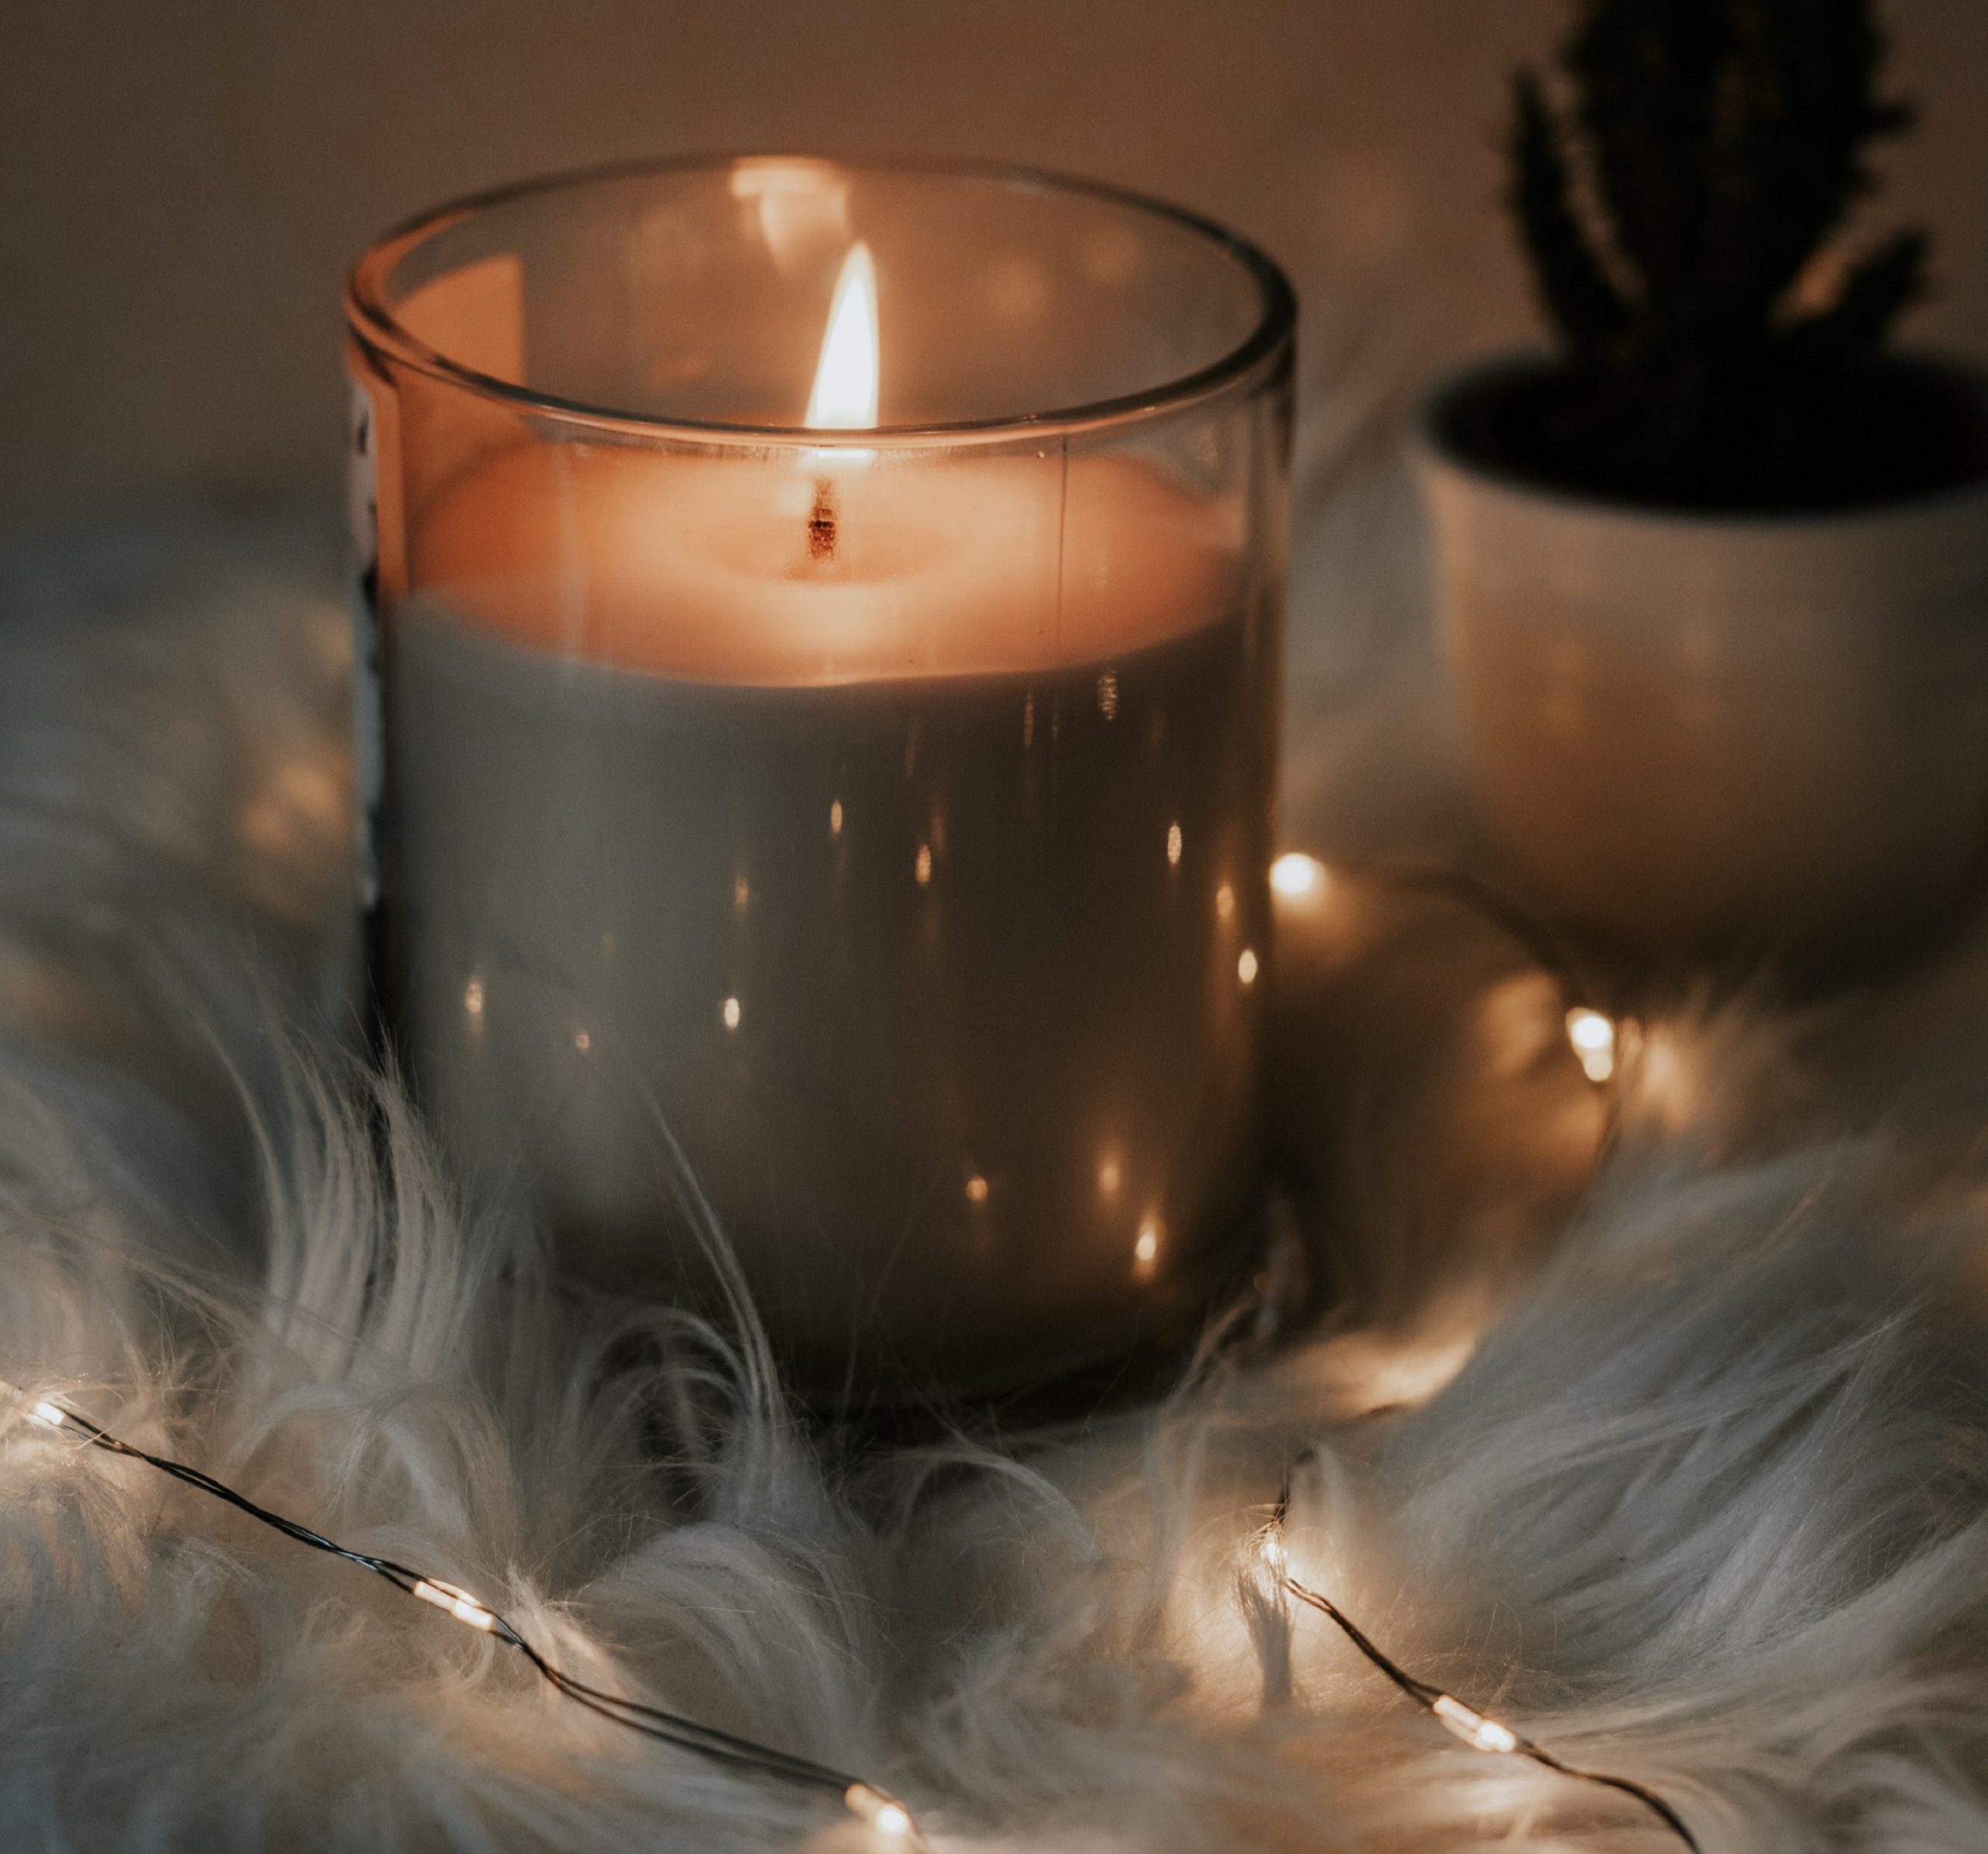 A lit candle sits on a fuzzy blanket surrounded by a string of lights.